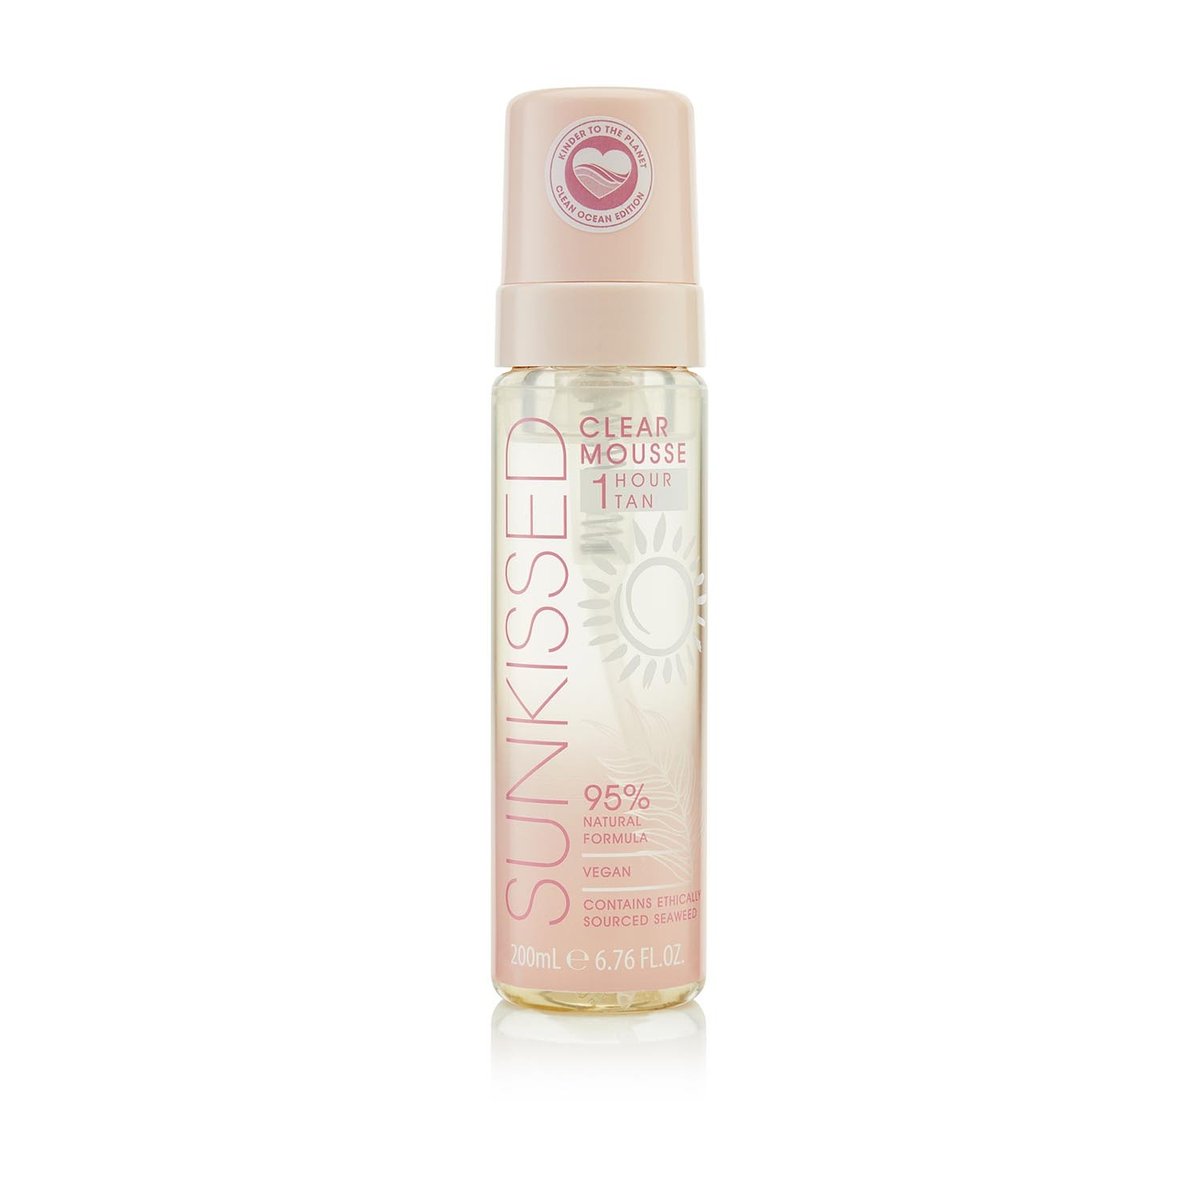 Sunkissed Sunkissed Clear Mousse 1 Hour Tan samoopalacz 200 ml